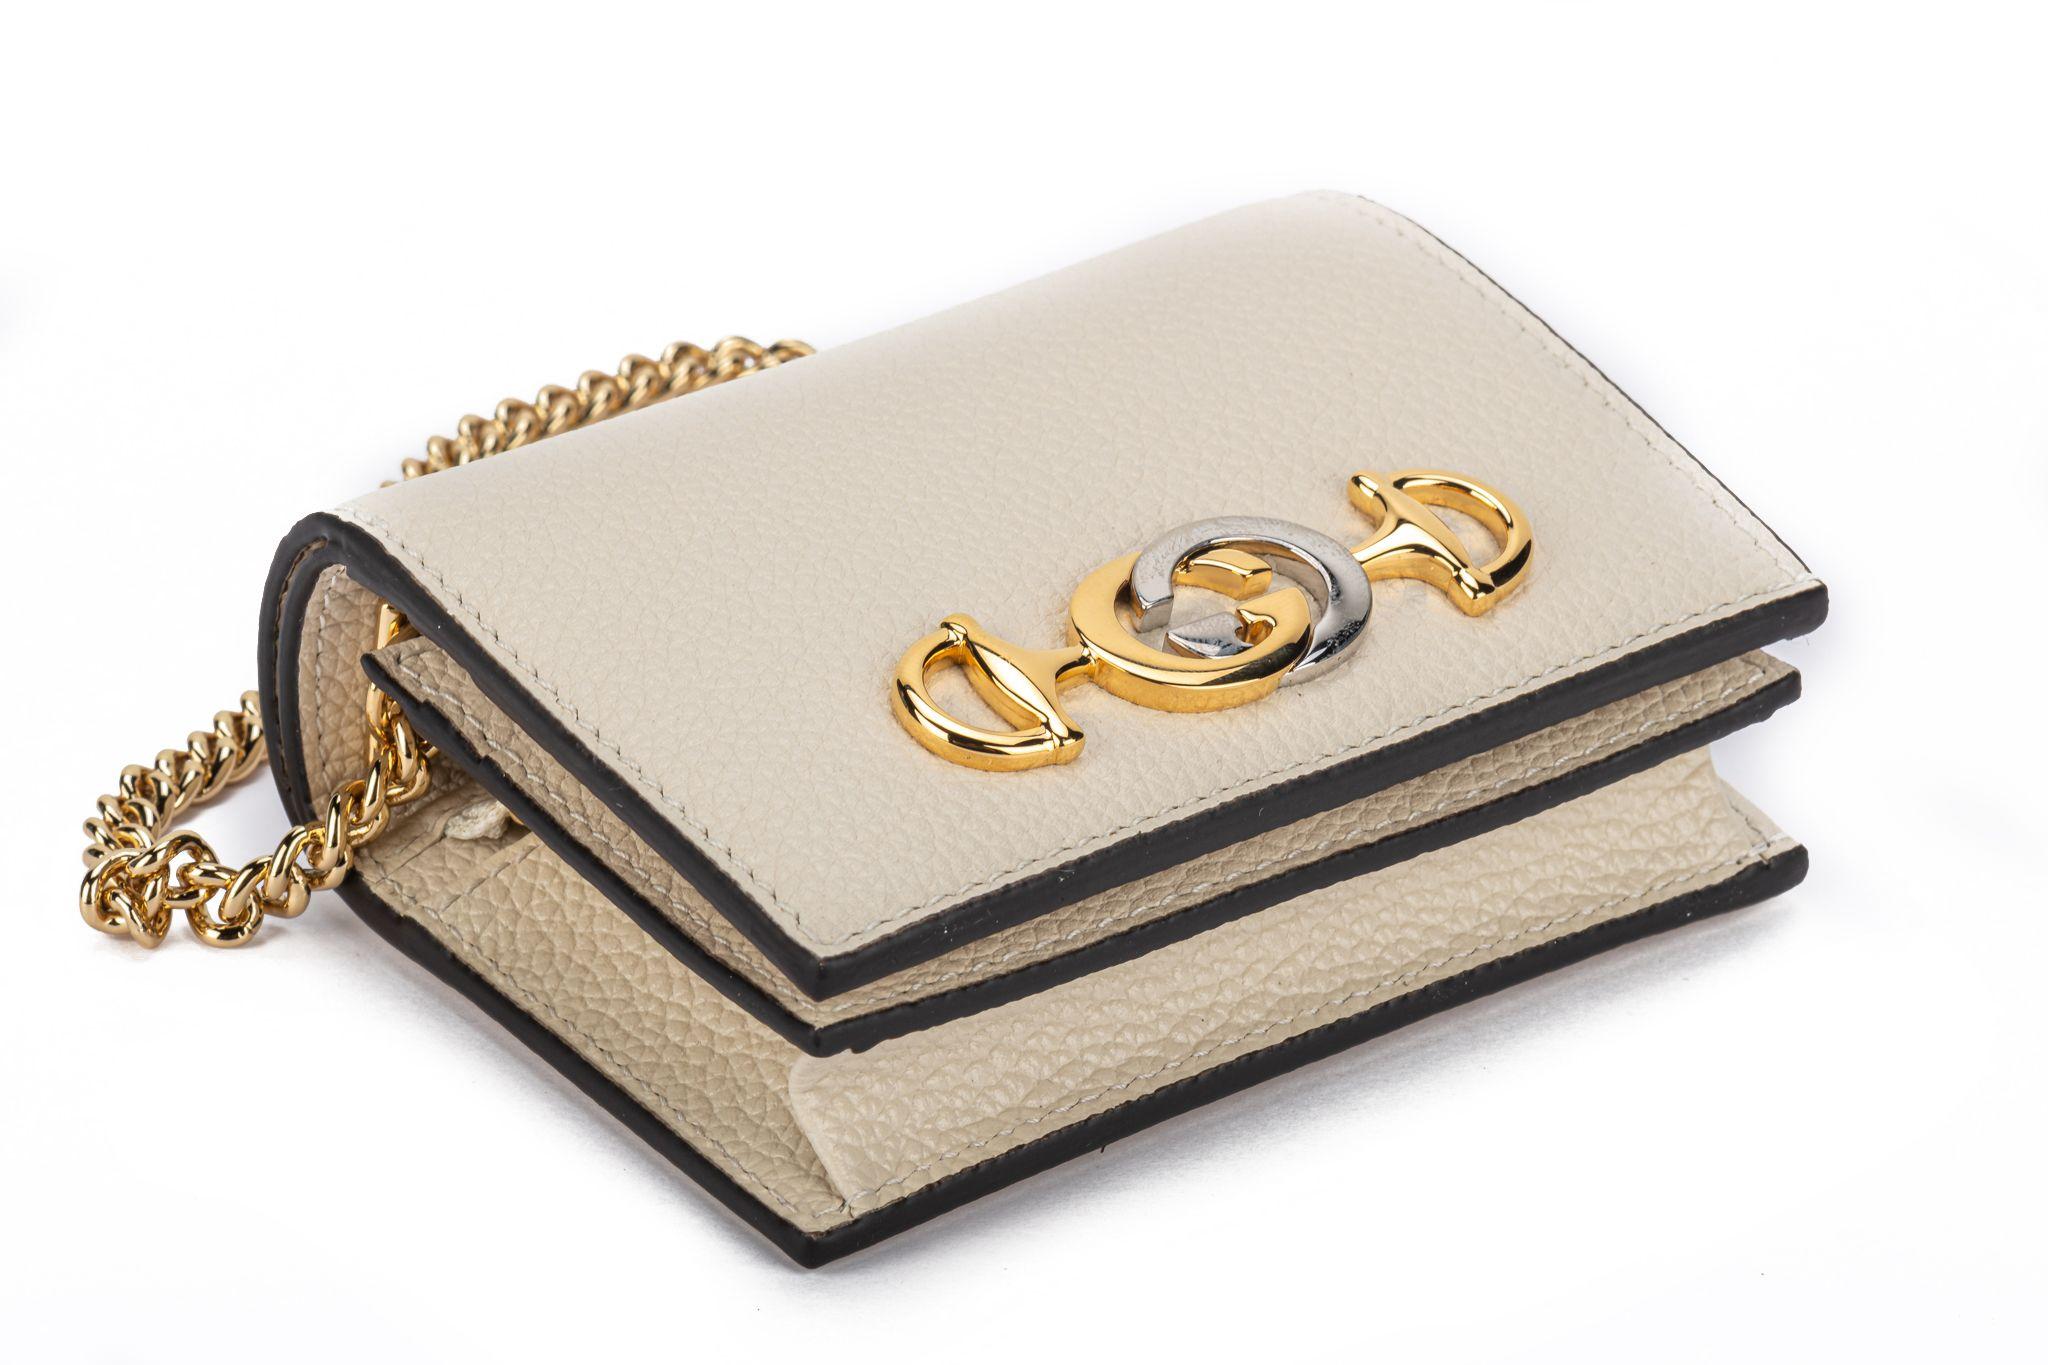 Gucci new mini bag/wallet with detachable chain. Cream pebbled leather and gold tone hardware. Handle drop 4”. Comes with original dust cover and box.